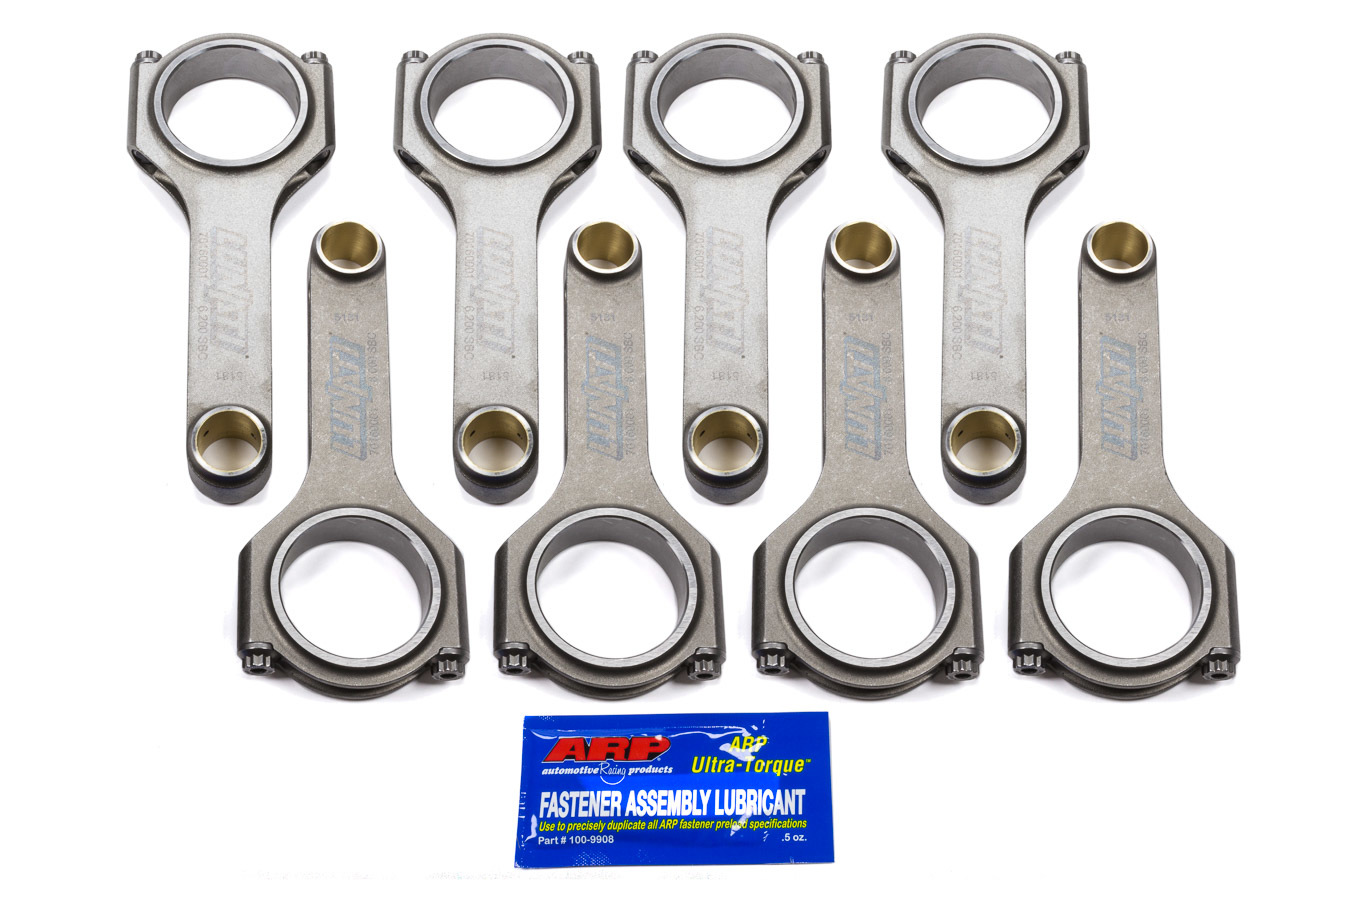 Lunati Cams 70160001-8 - Connecting Rod, Voodoo, H Beam, 6.000 in Long, Bushed, 7/16 in Cap Screws, Forged Steel, Small Block Chevy, Set of 8